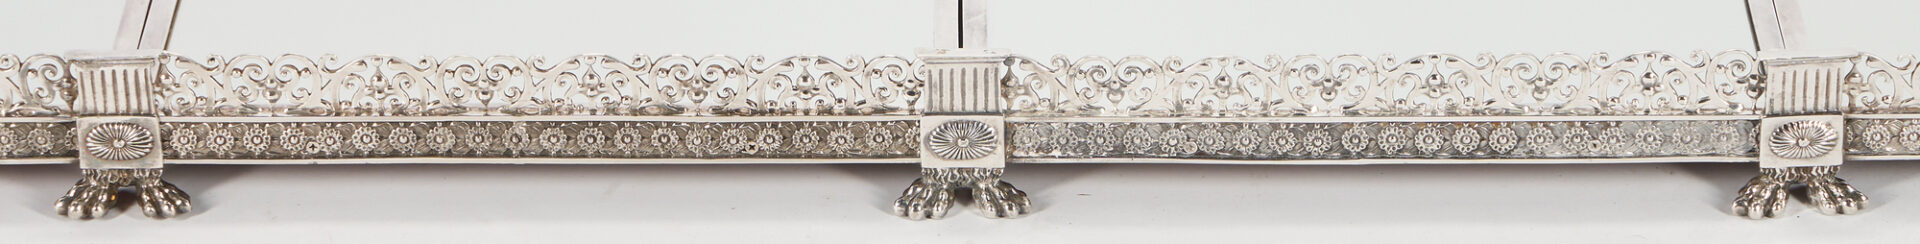 Lot 770: English Neoclassical Style Silver Plated Table Plateau